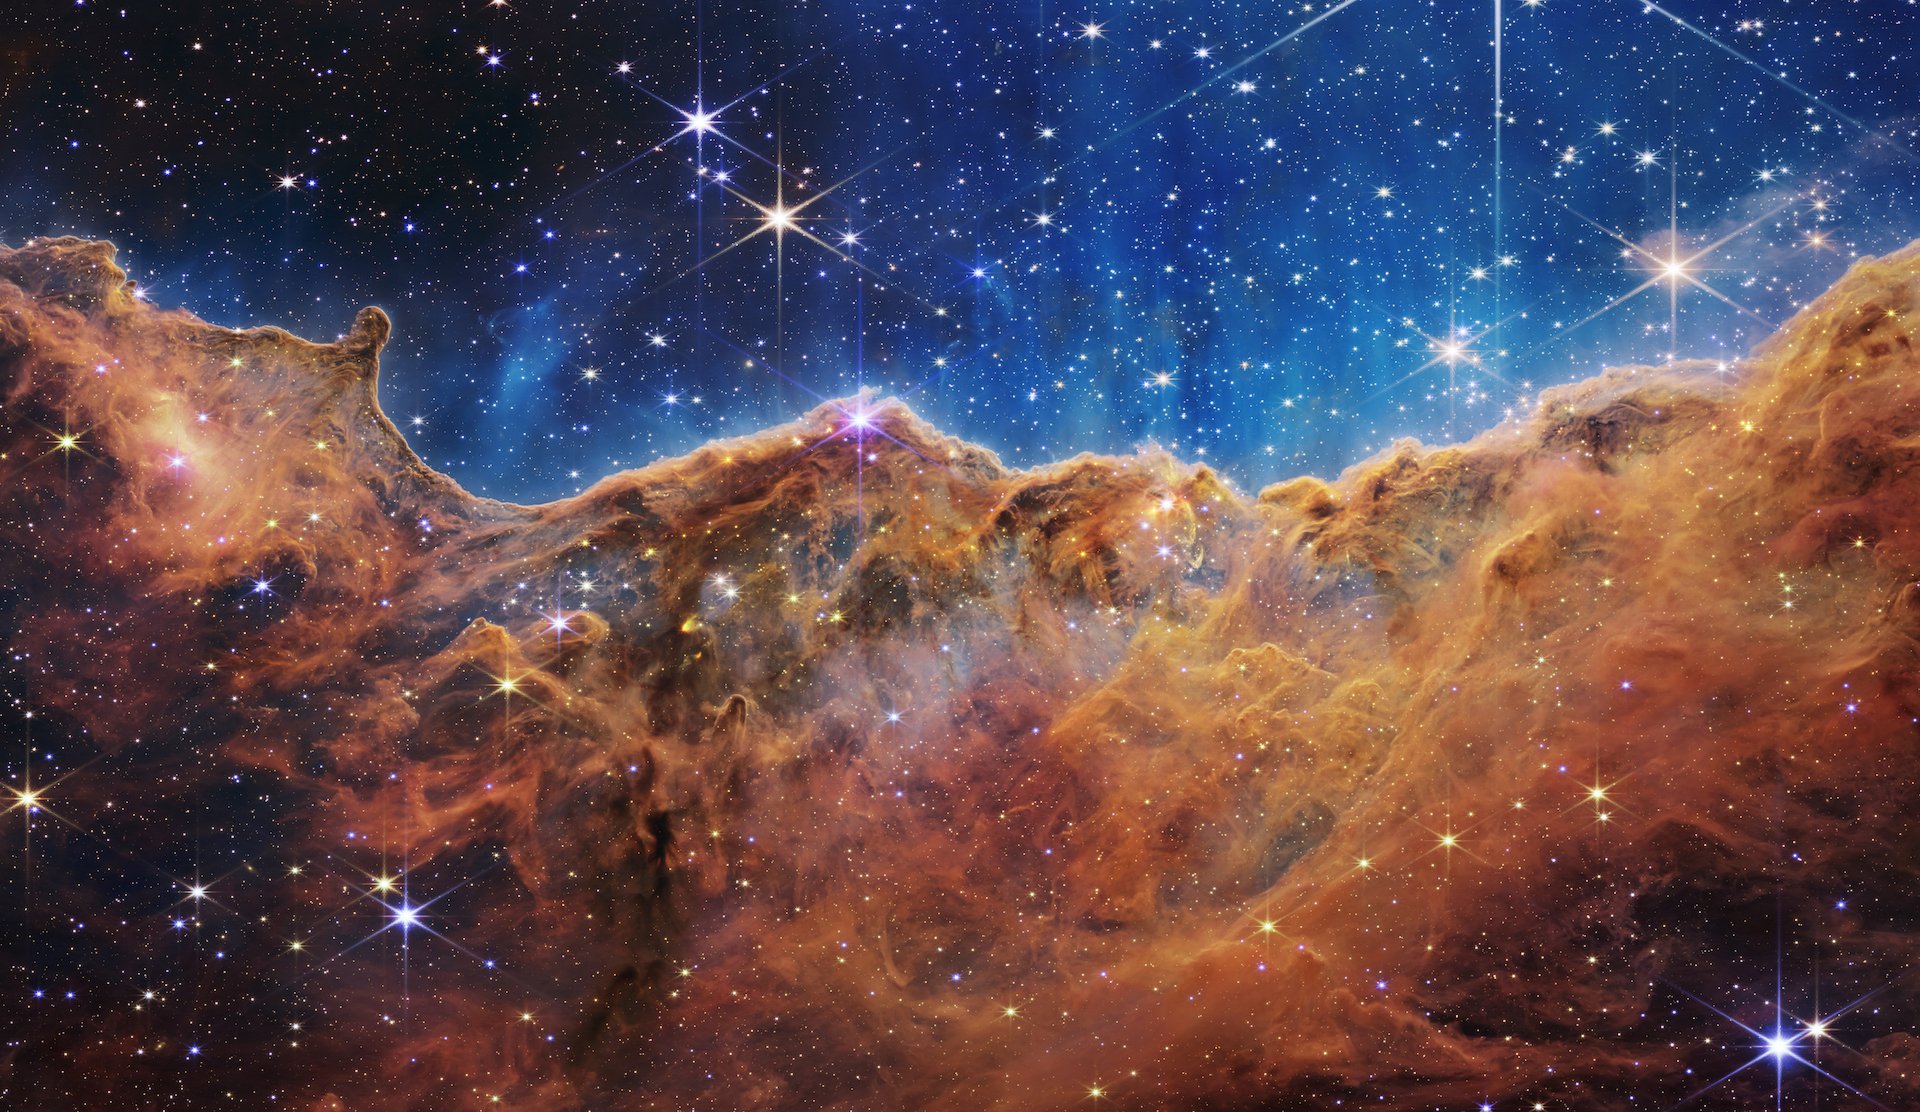 Clouds of dust and gas of the Carina Nebula, where stars form, photographed by the James Webb Telescope.